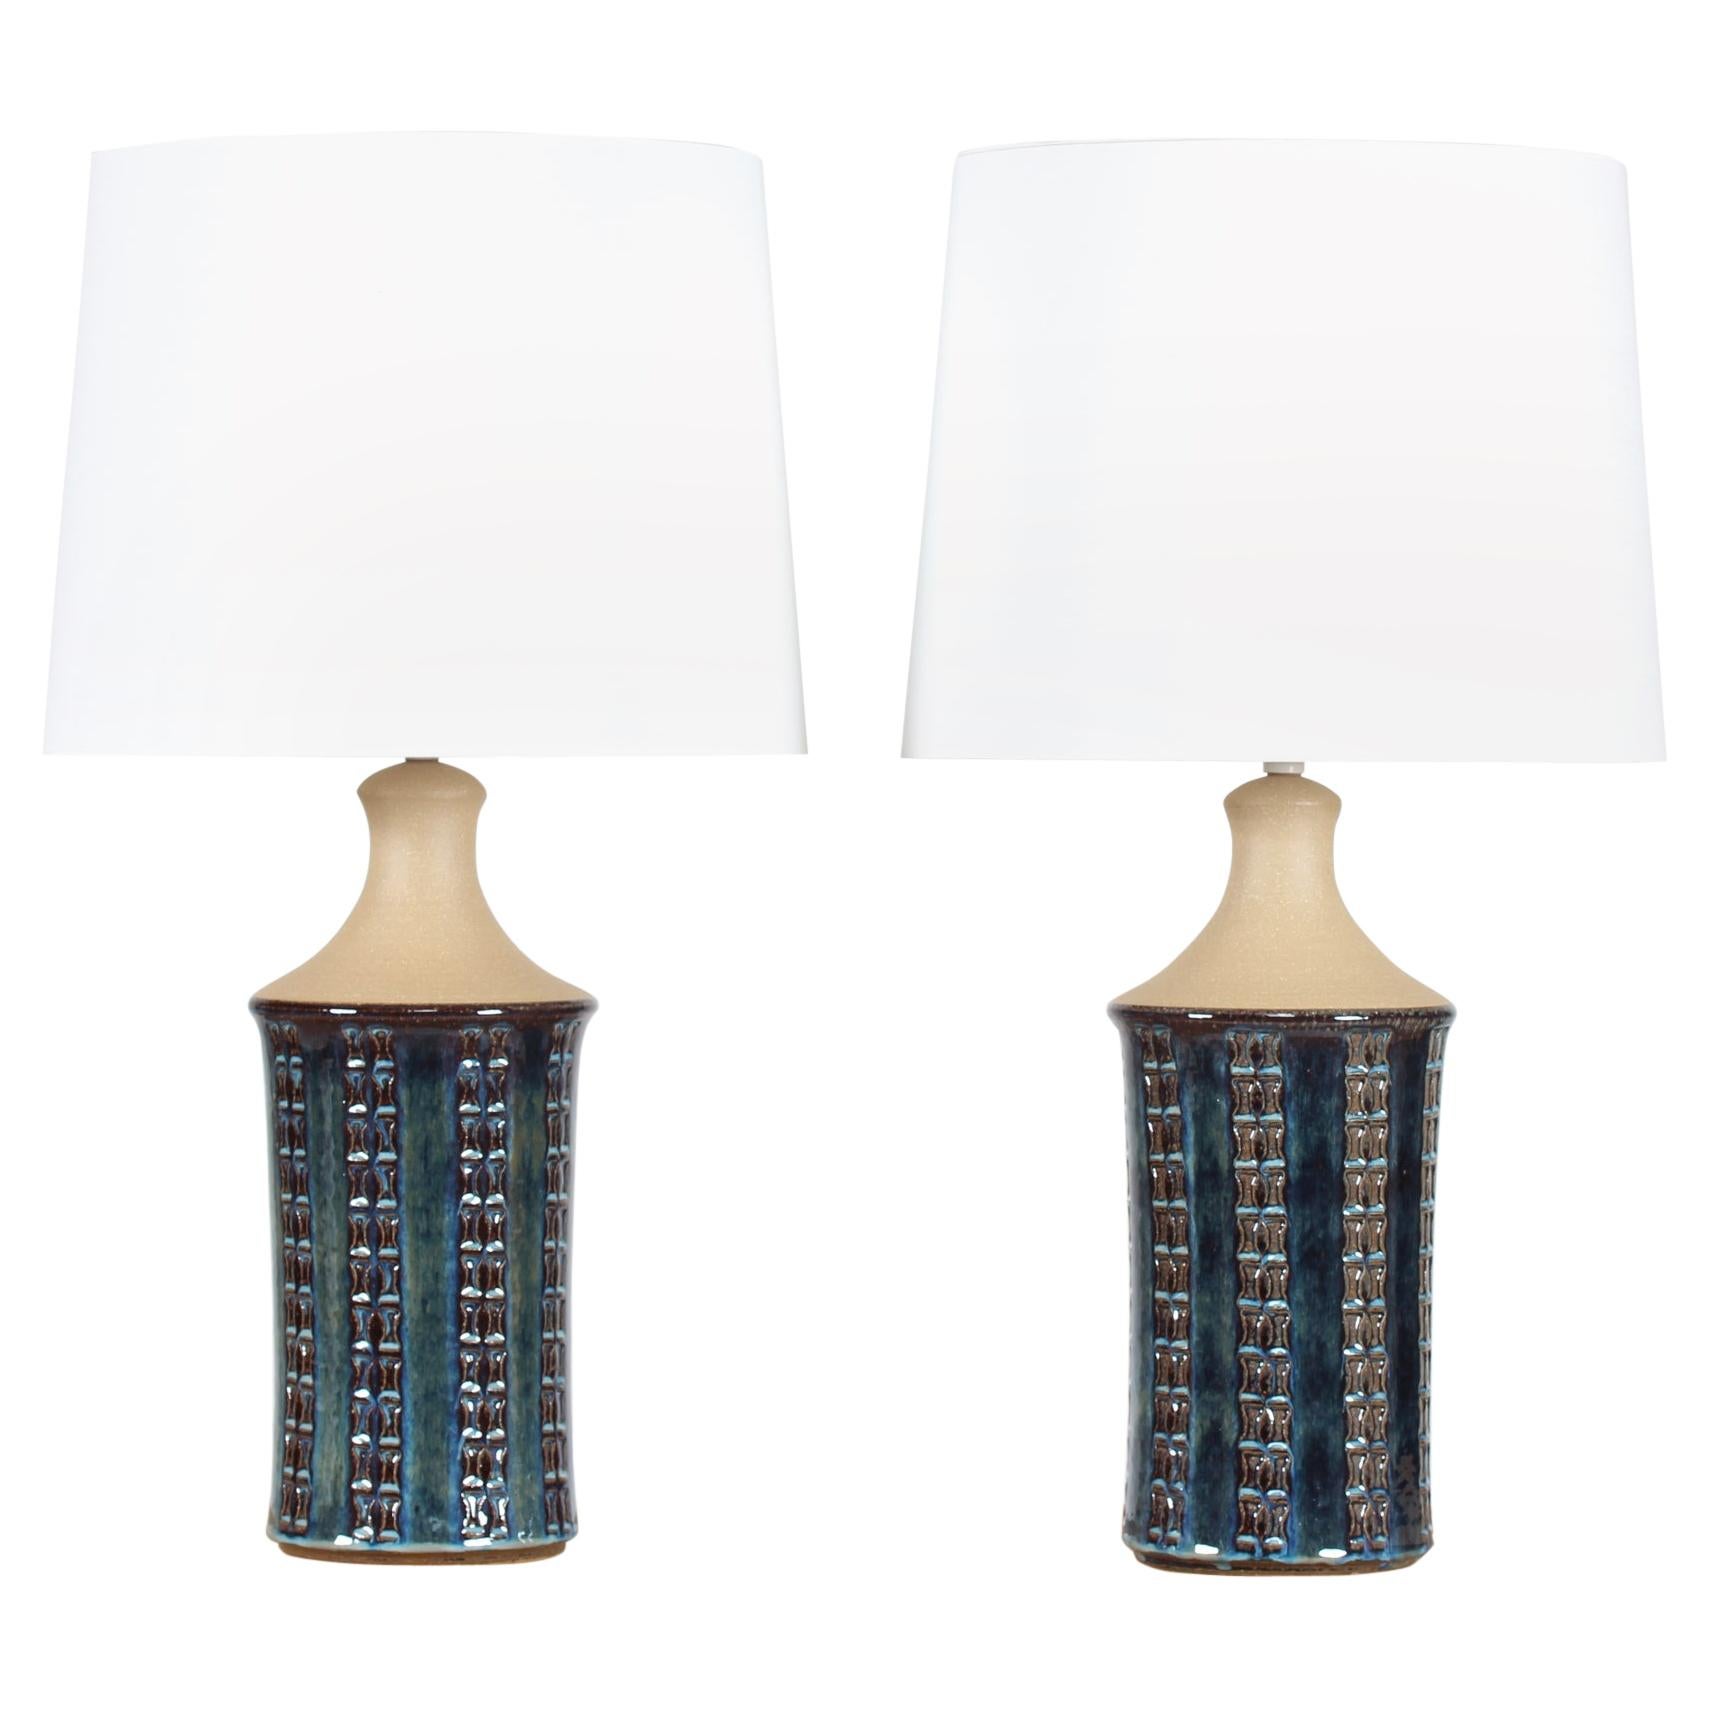 Pair of Tall Stoneware Table Lamps by Maria Philippi for Søholm, Denmark 1960´s